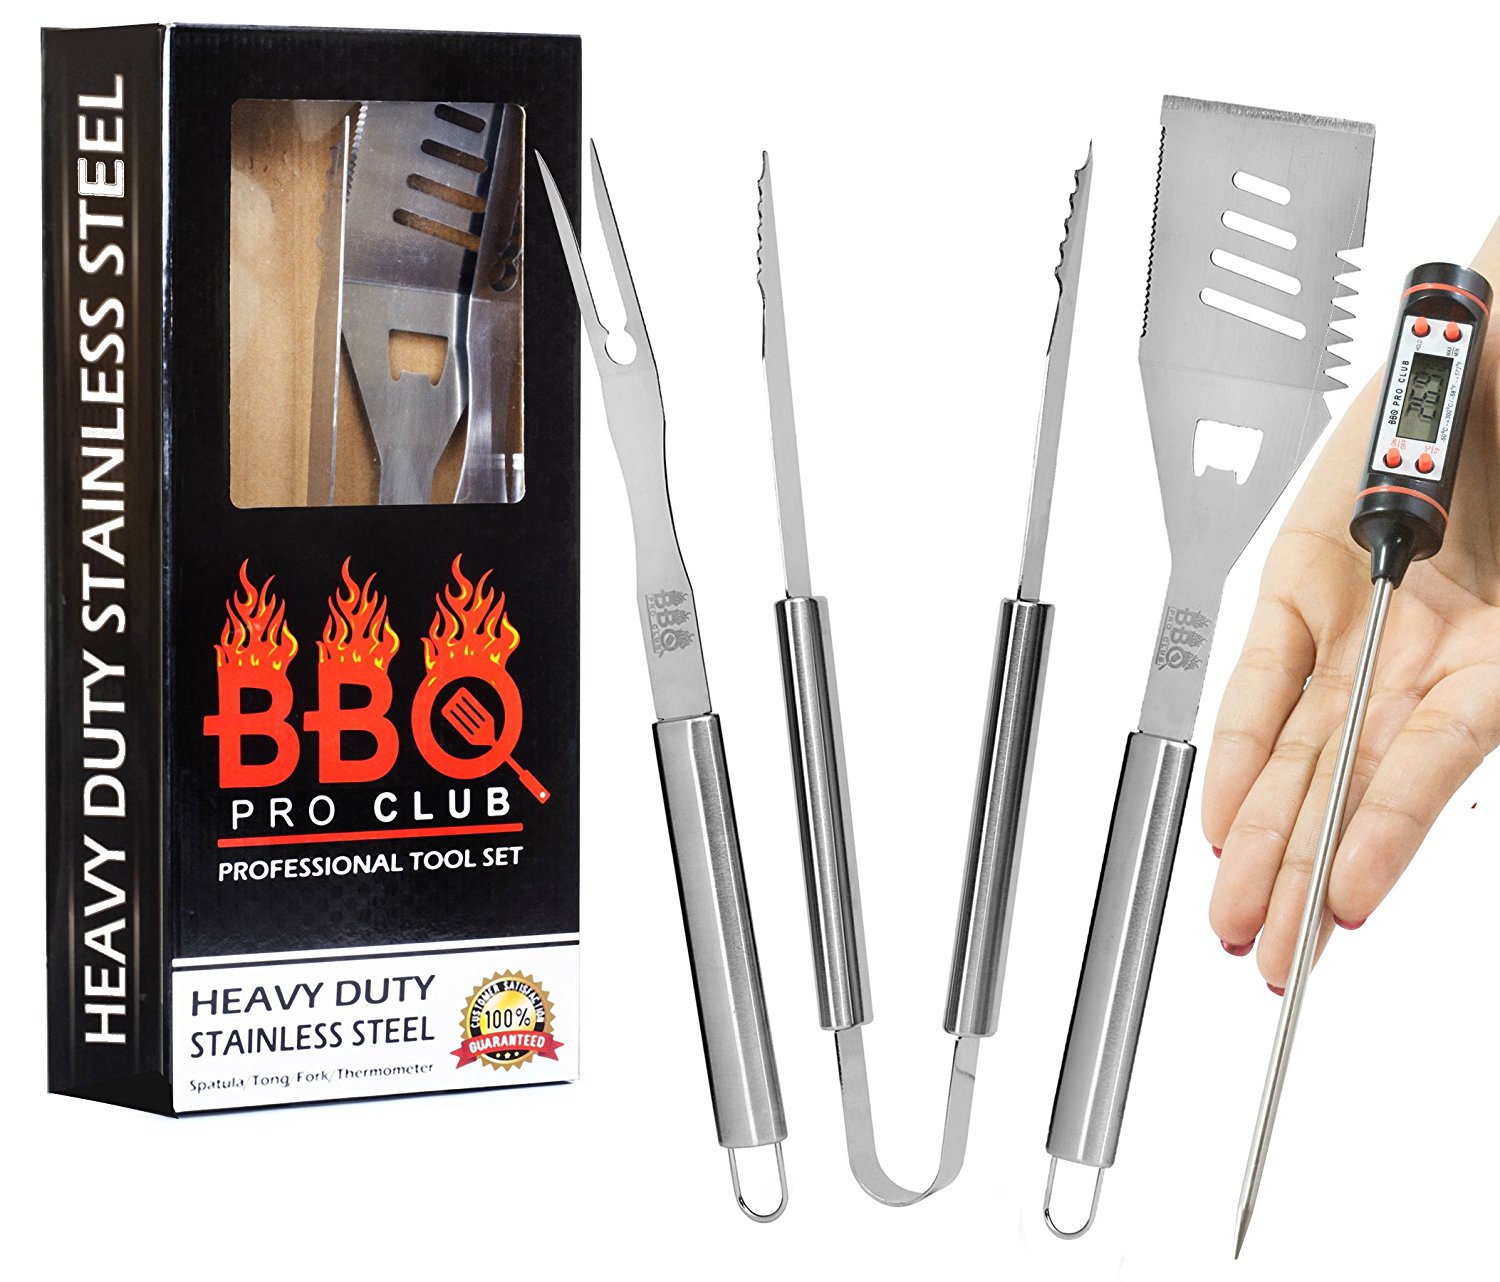 Grill Accessories, 4 piece BBQ Tool Grill Set - Grill Tools Includes Stainless Steel Metal Spatula, Fork, Tongs and Instant Read Meat BBQ Thermometer, Great For Gifts - By BBQ Pro Club - image 1 of 7